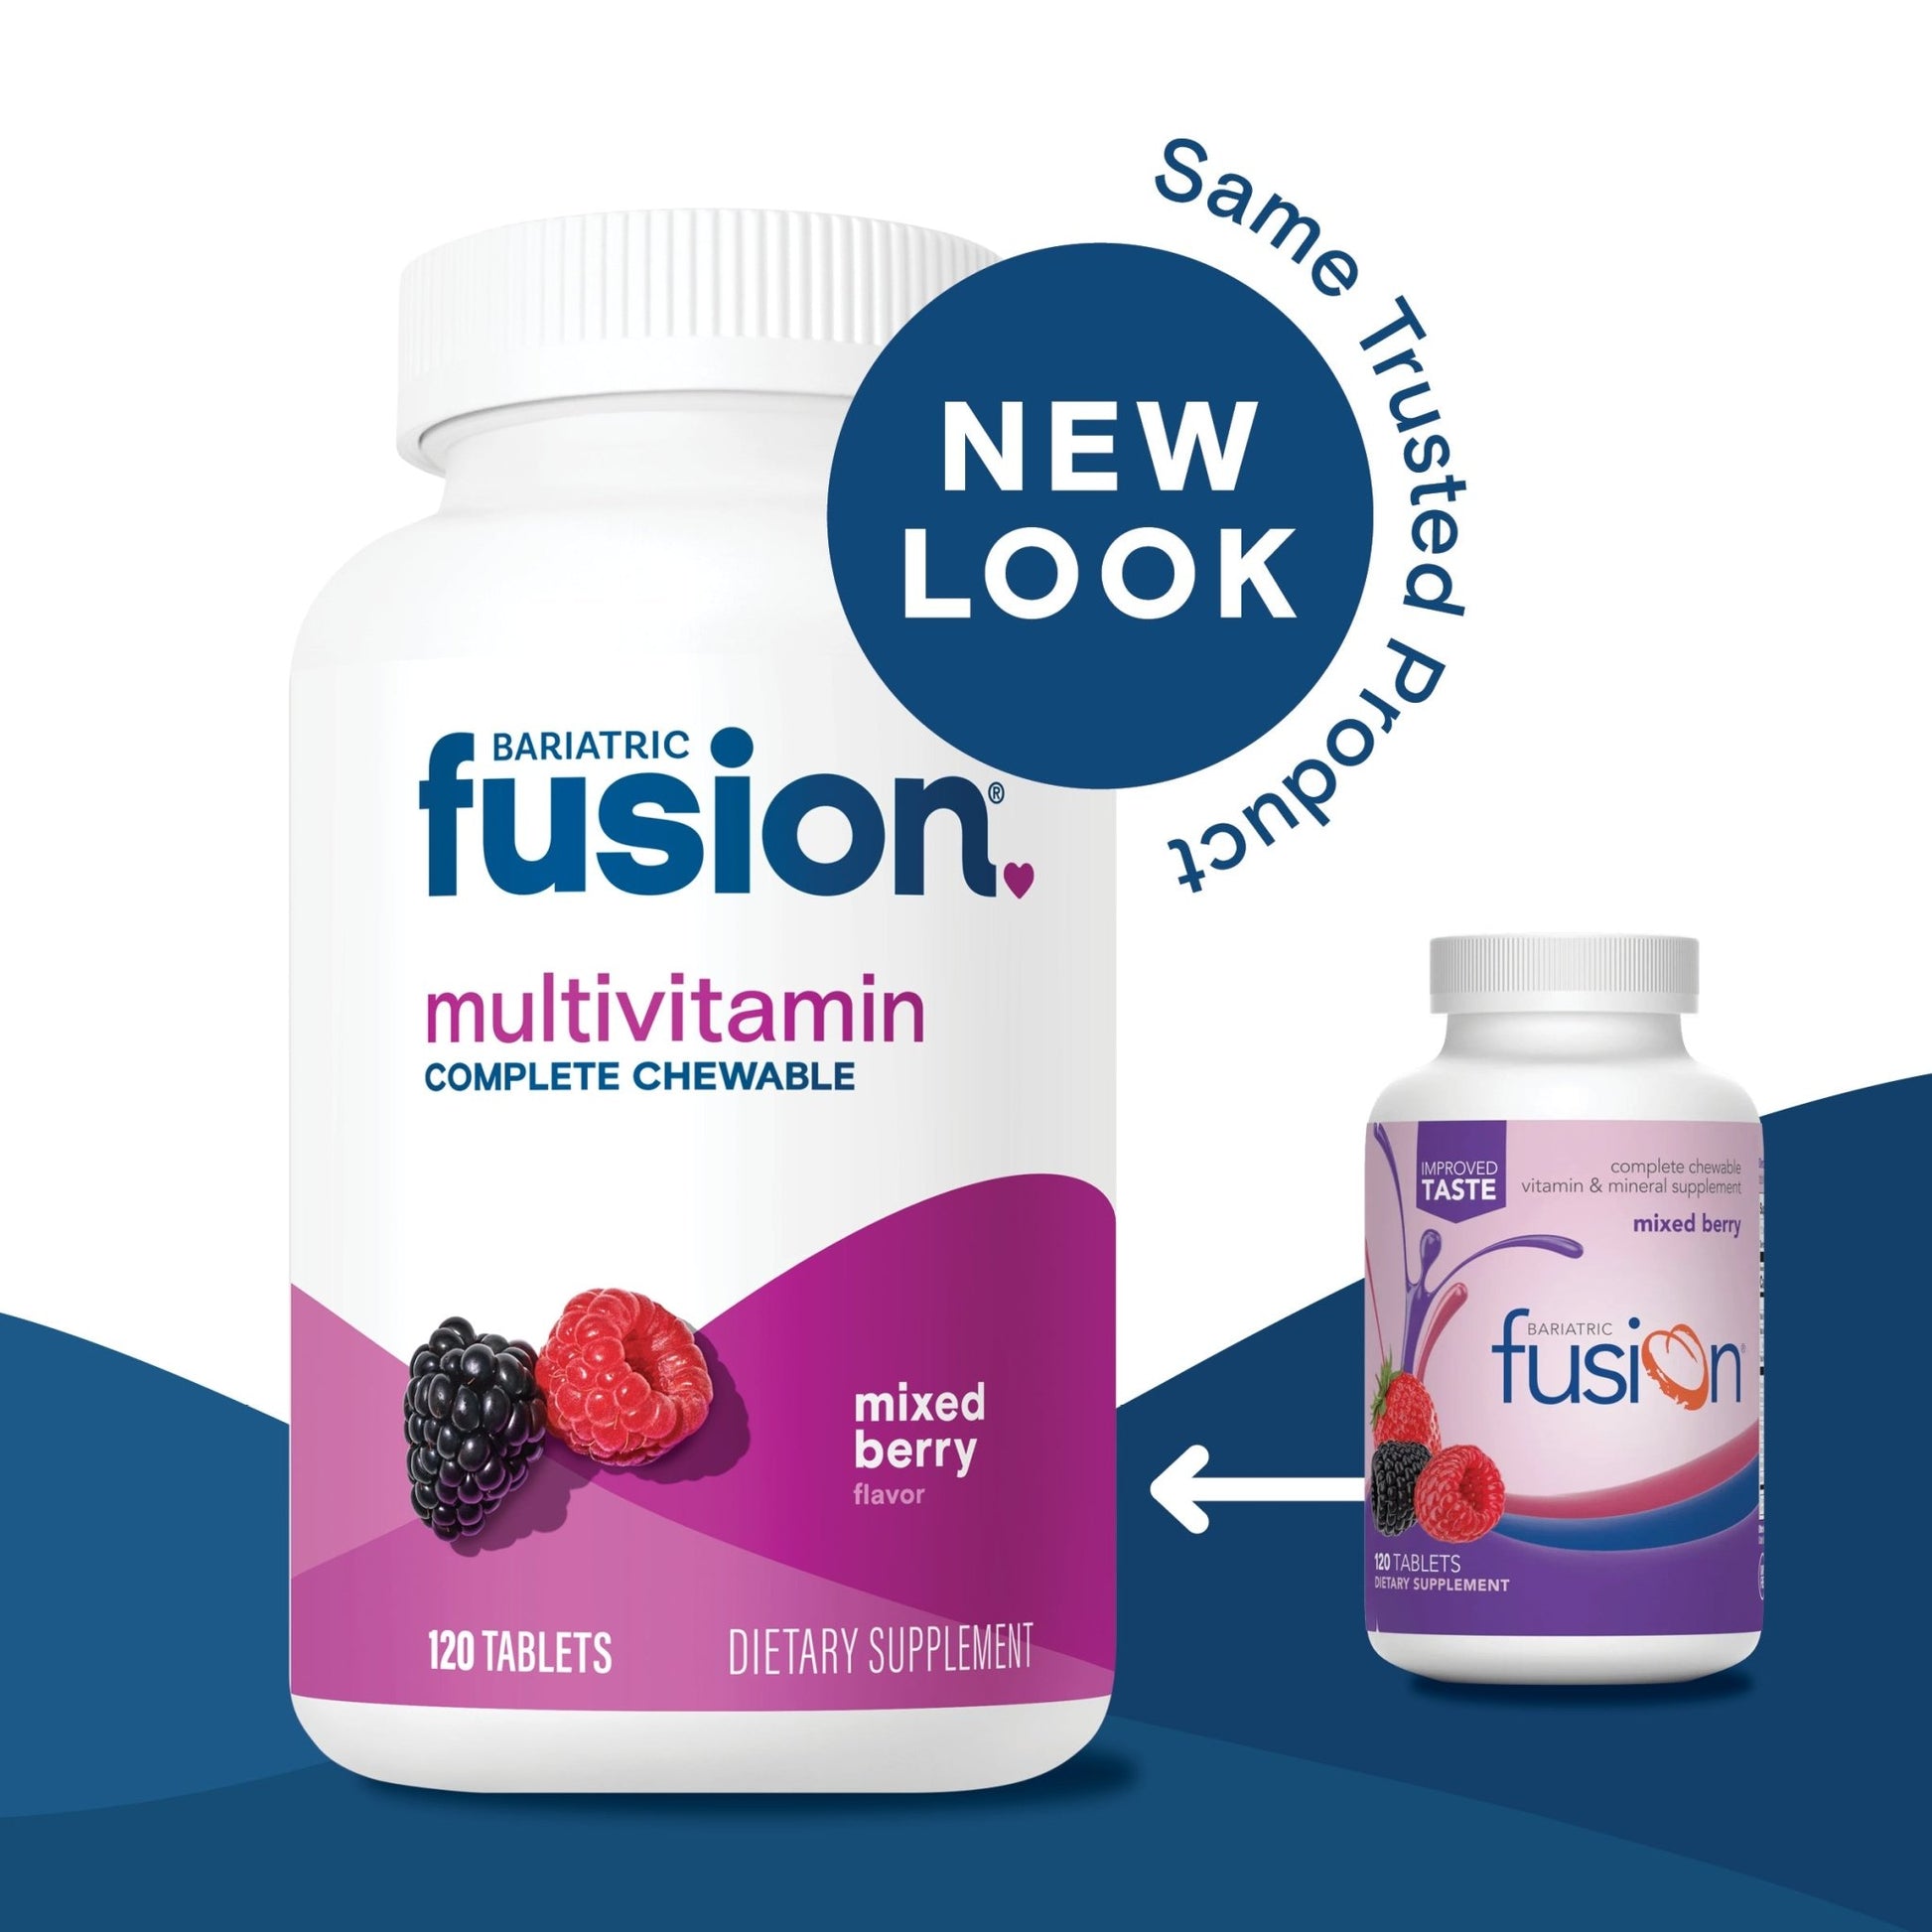 Bariatric Fusion Mixed Berry Complete Chewable Bariatric Multivitamin new look, same trusted product.